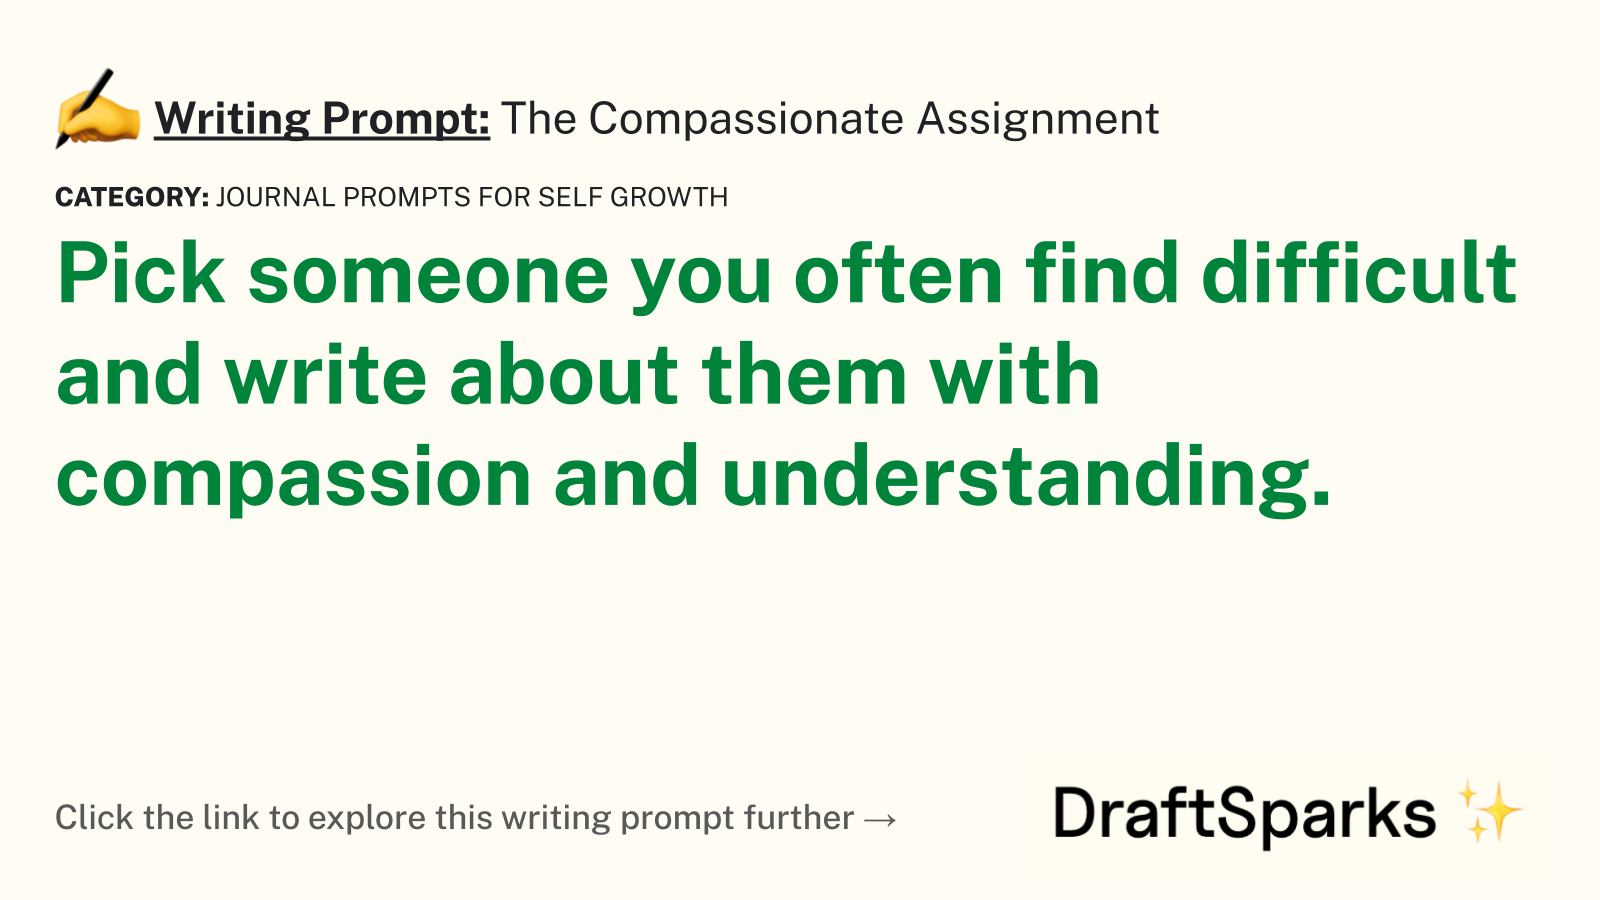 The Compassionate Assignment